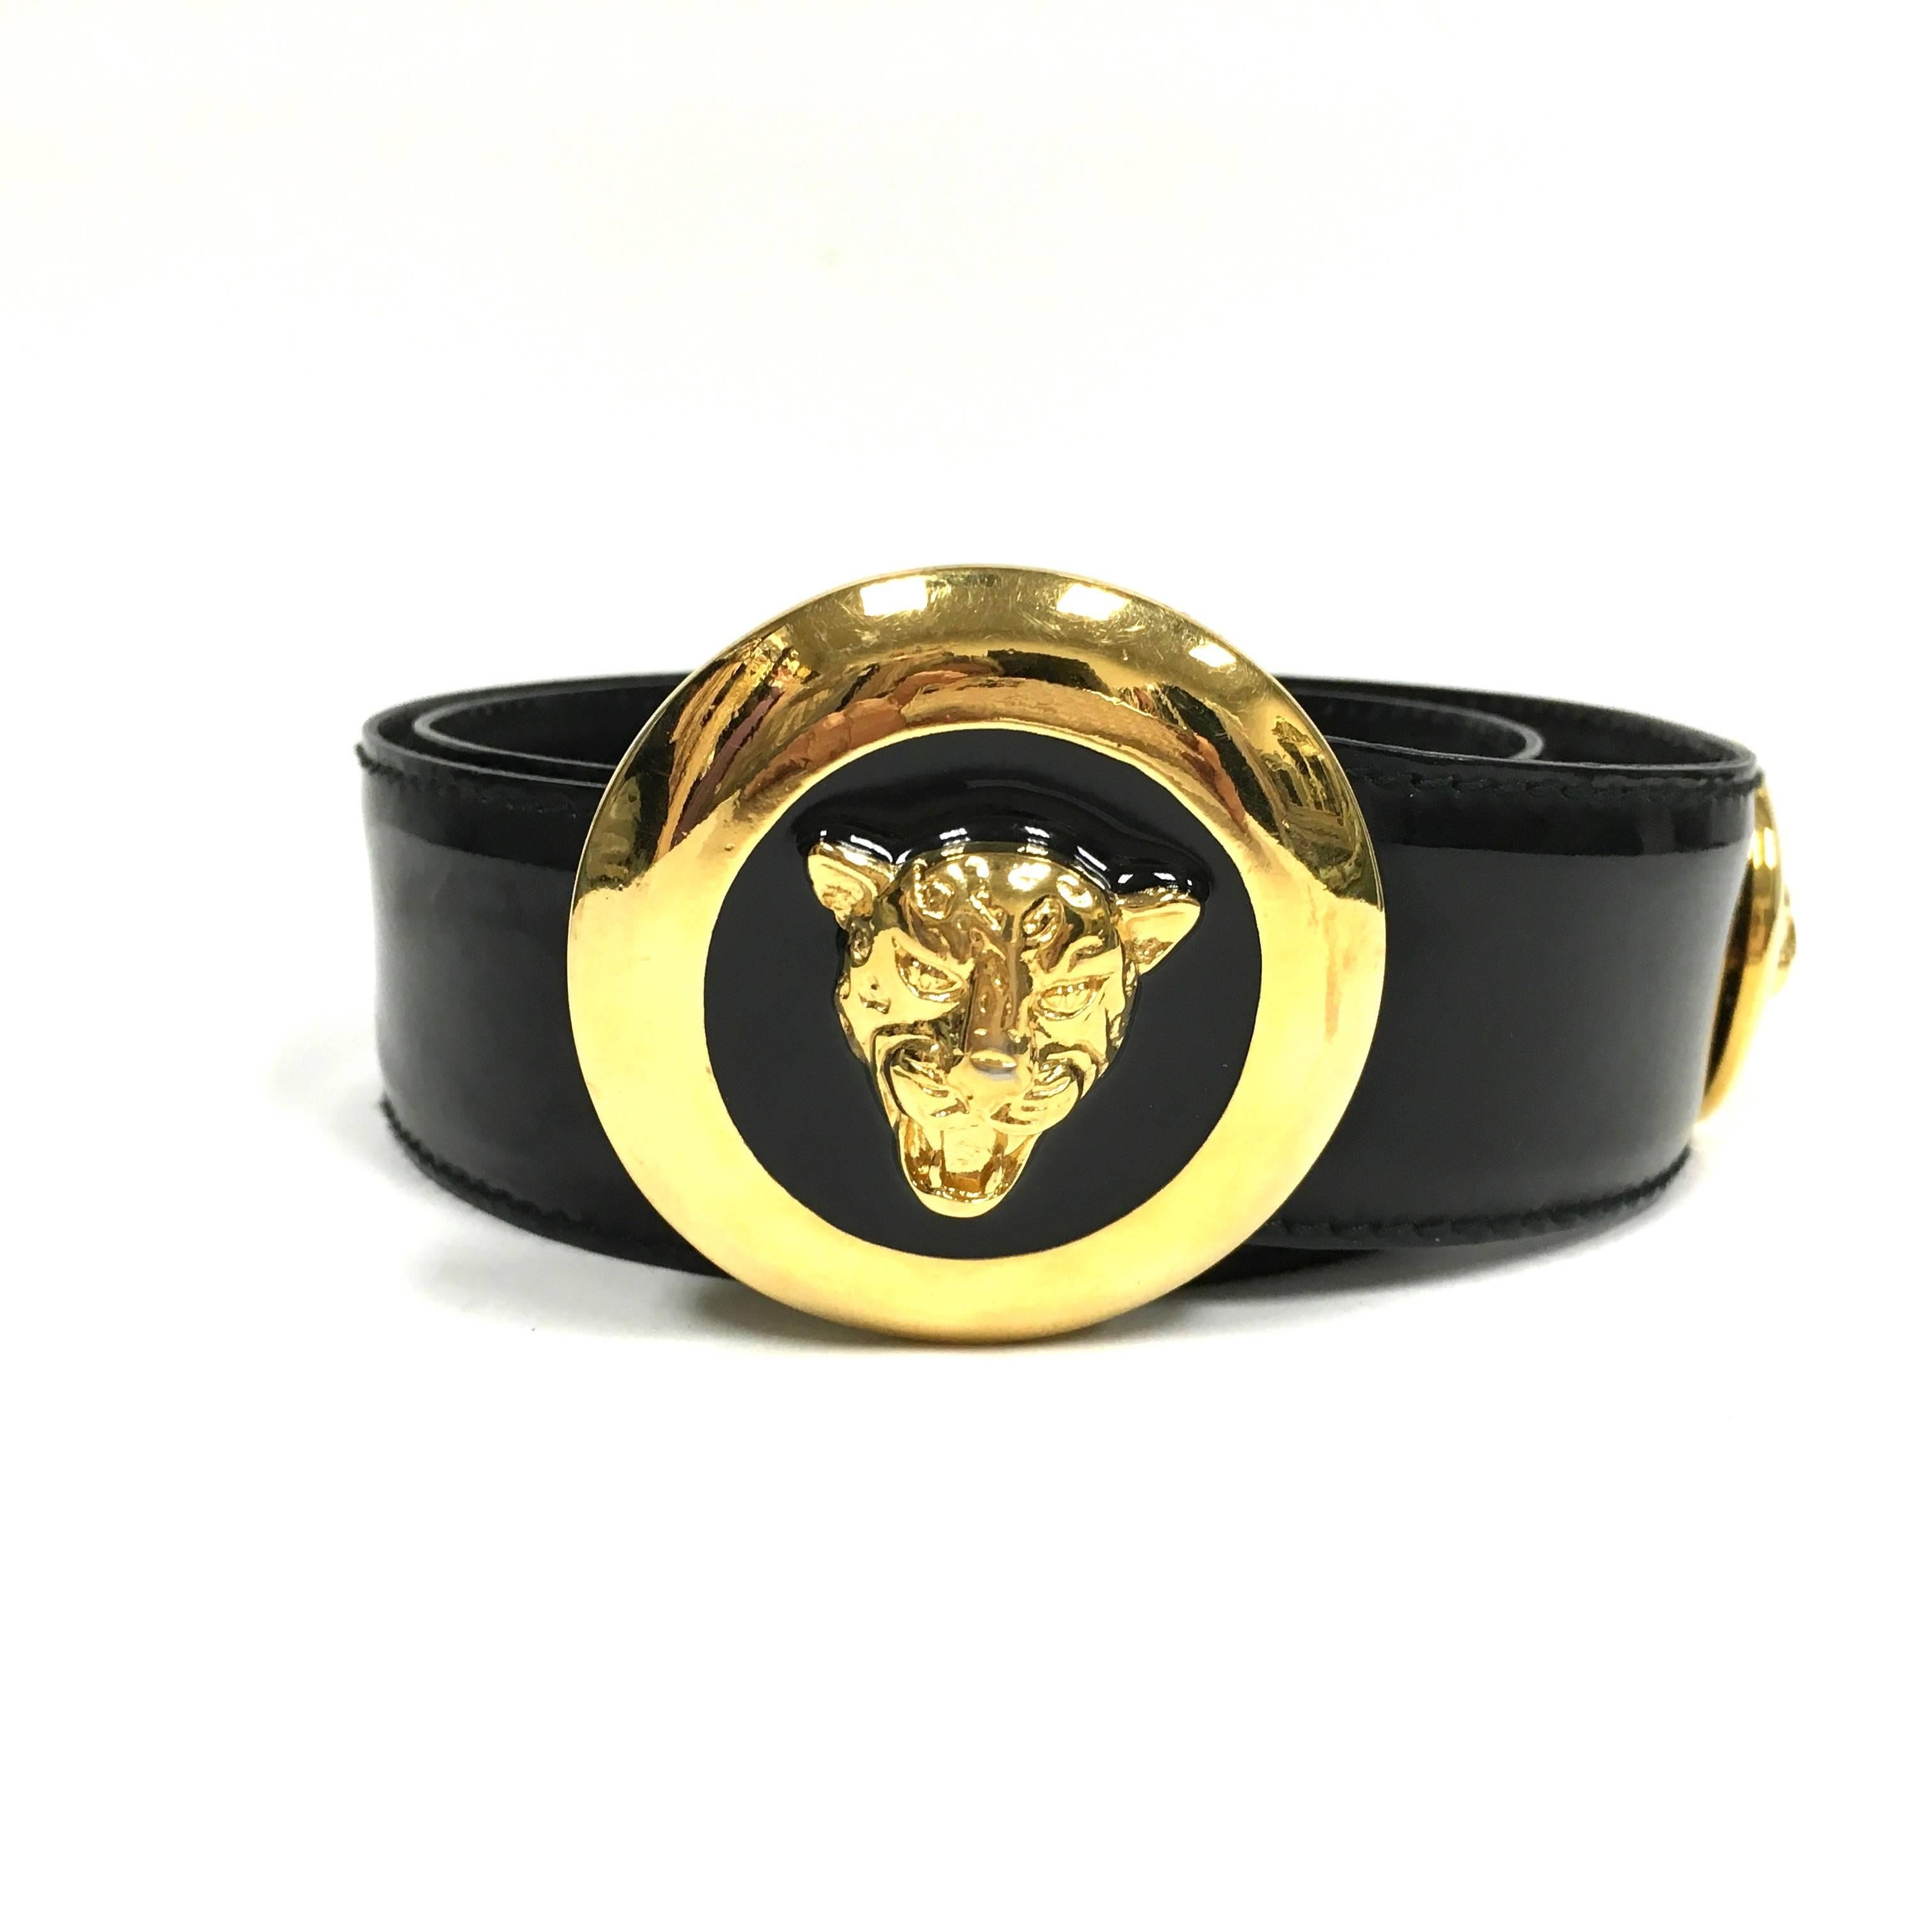 ESCADA Vintage Belt Black Patent Leather Gold Enamel Leopard Animal Charm 
Size: 80/34 XS
Made in Germany

Features adjustable size with 3 belt notches.
Color: Goldtone and black
Composition: Metal and leather
Closure/opening: Belt buckle and